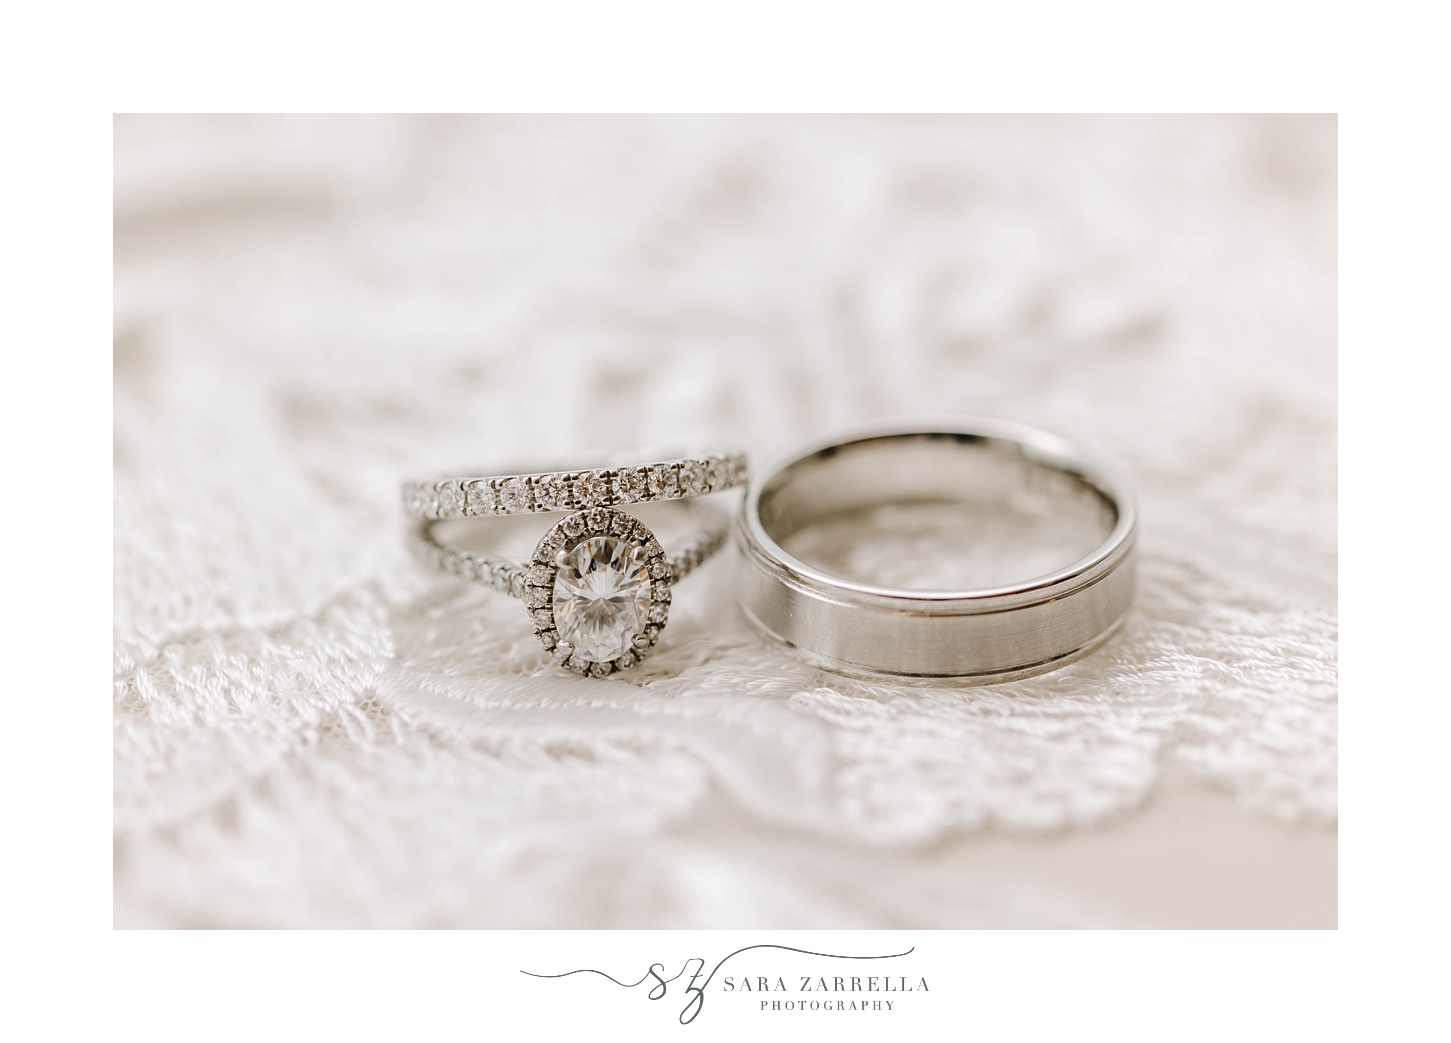 silver wedding bands rest on lace of veil